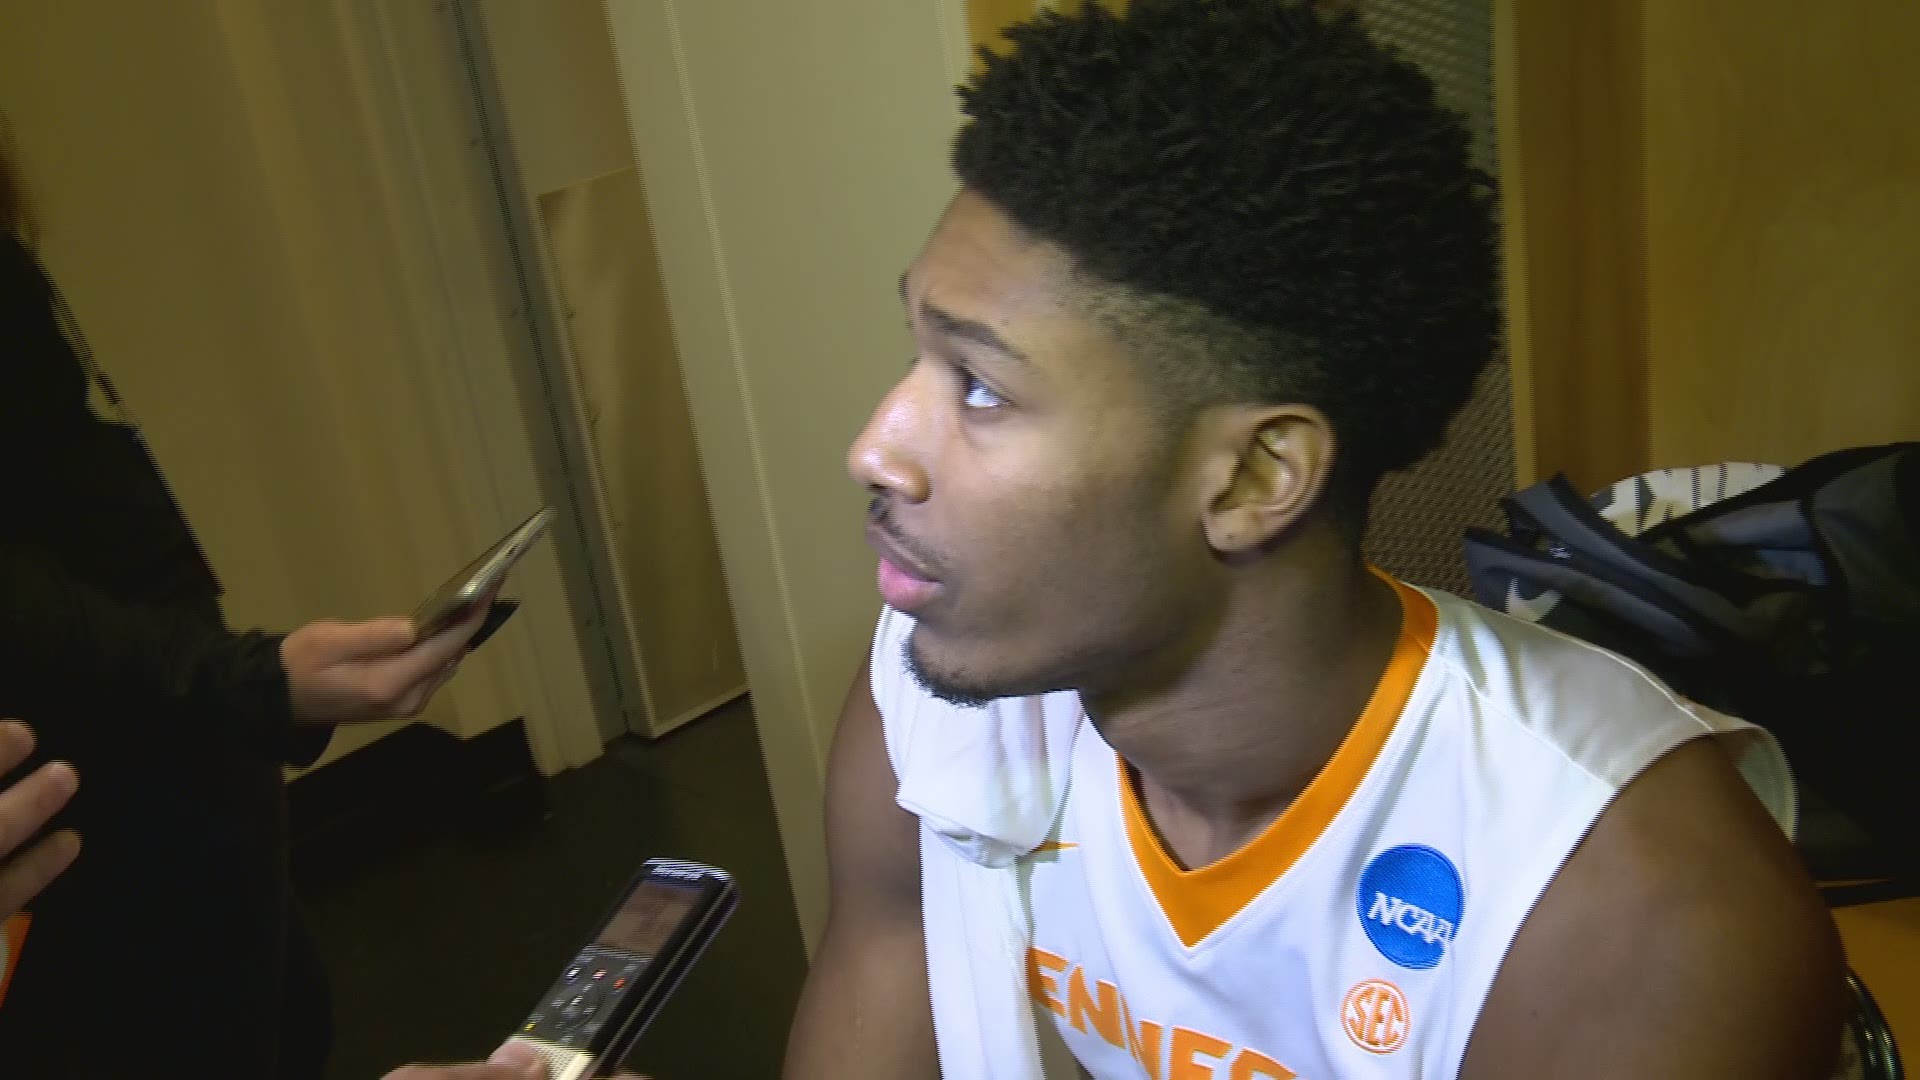 Junior center Kyle Alexander talks to the media after the Vols beat Wright State 73-47 in the first round of the NCAA Tournament. He had 6 points, 4 rebounds and 2 blocks.